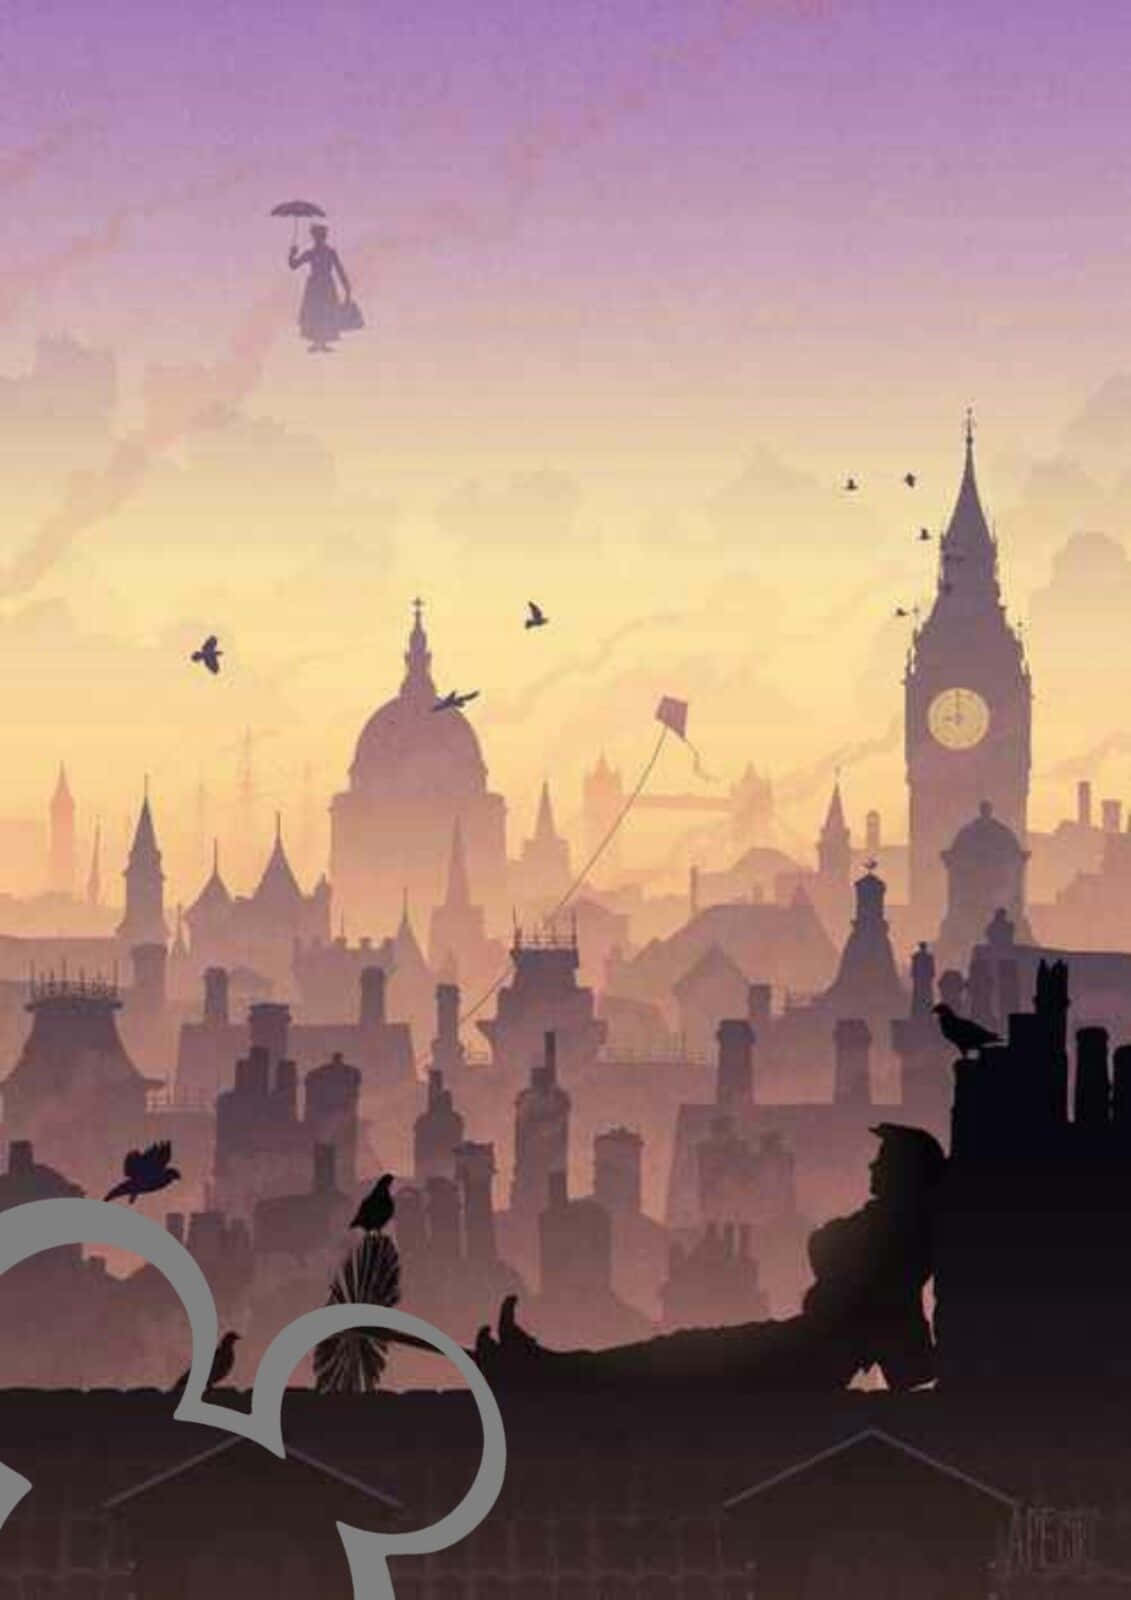 Timeless Mary Poppins Brings A World Of Magic And Wonder Wallpaper